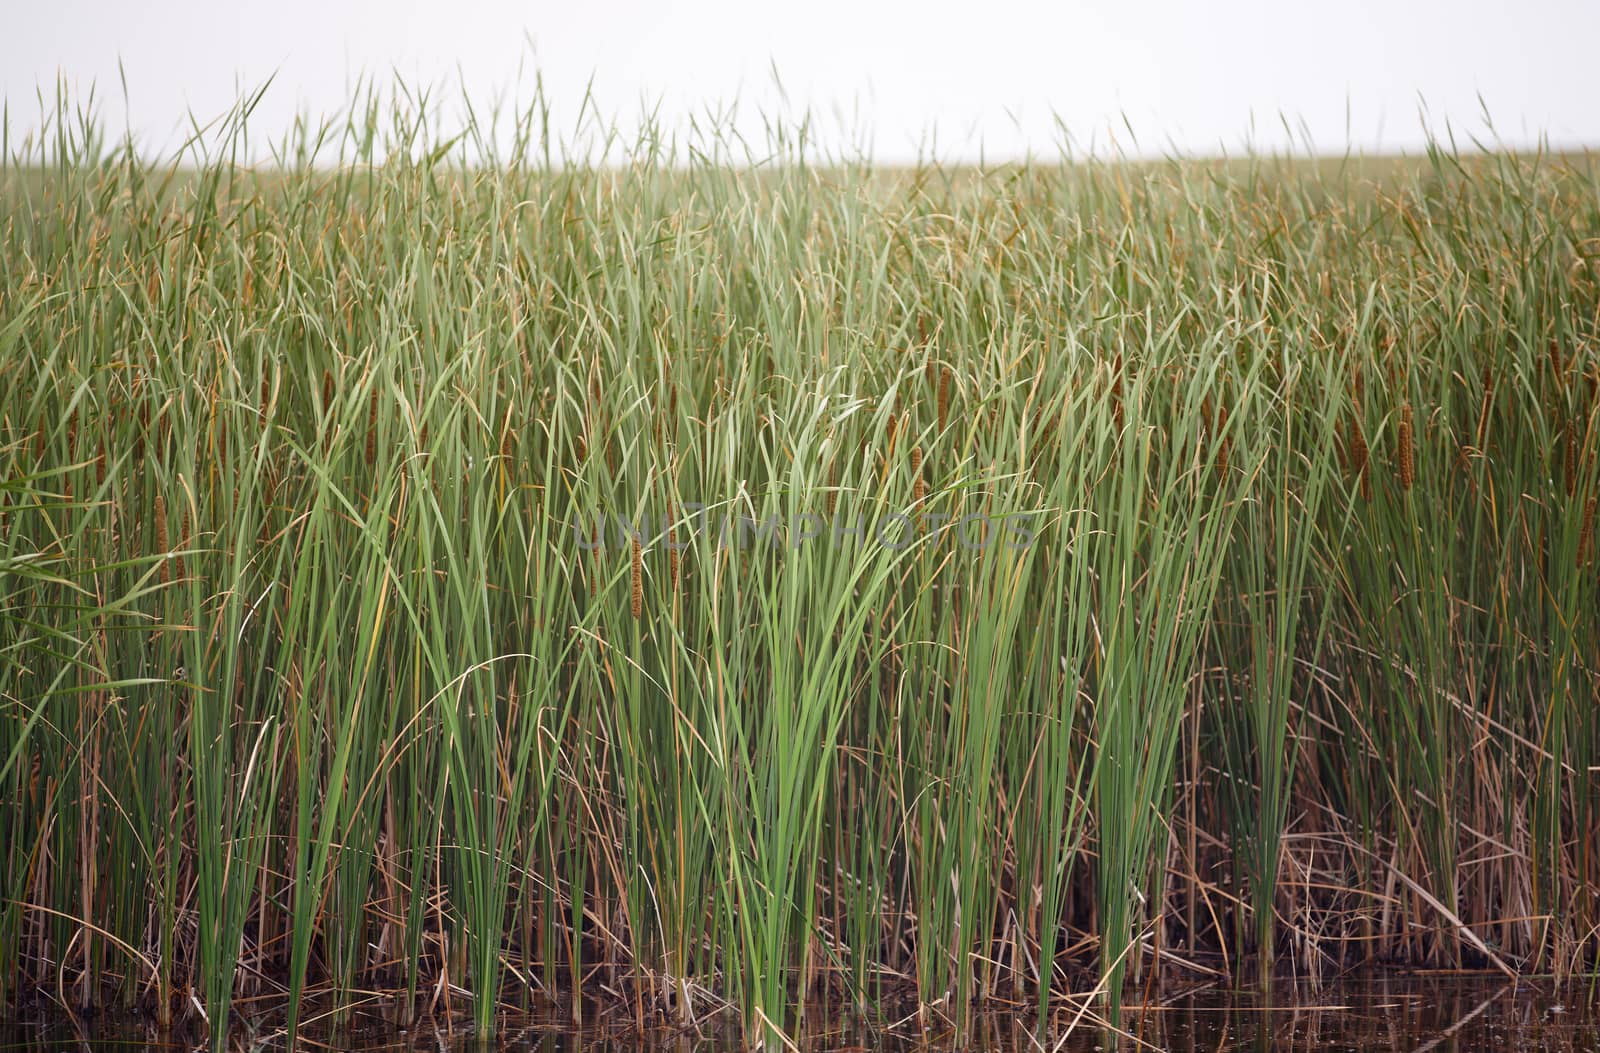 Reed plants in open water of the Florida lake